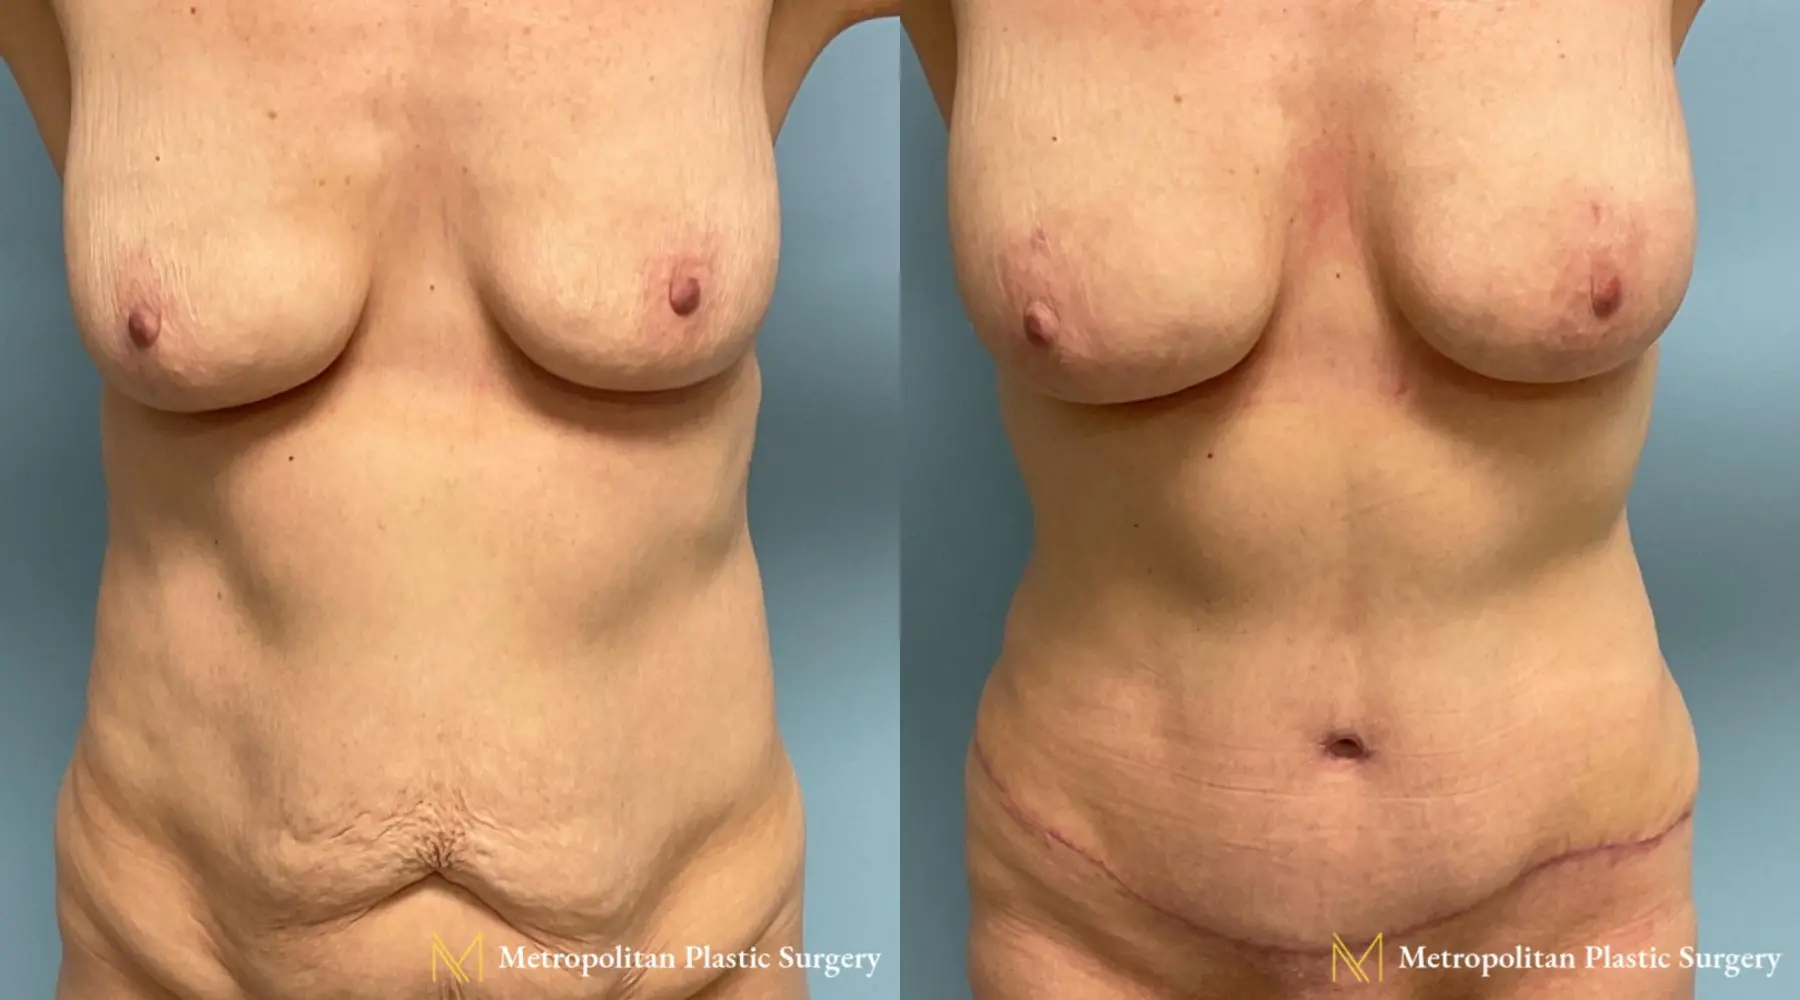 Abdominoplasty Marlton NJ - Before and After